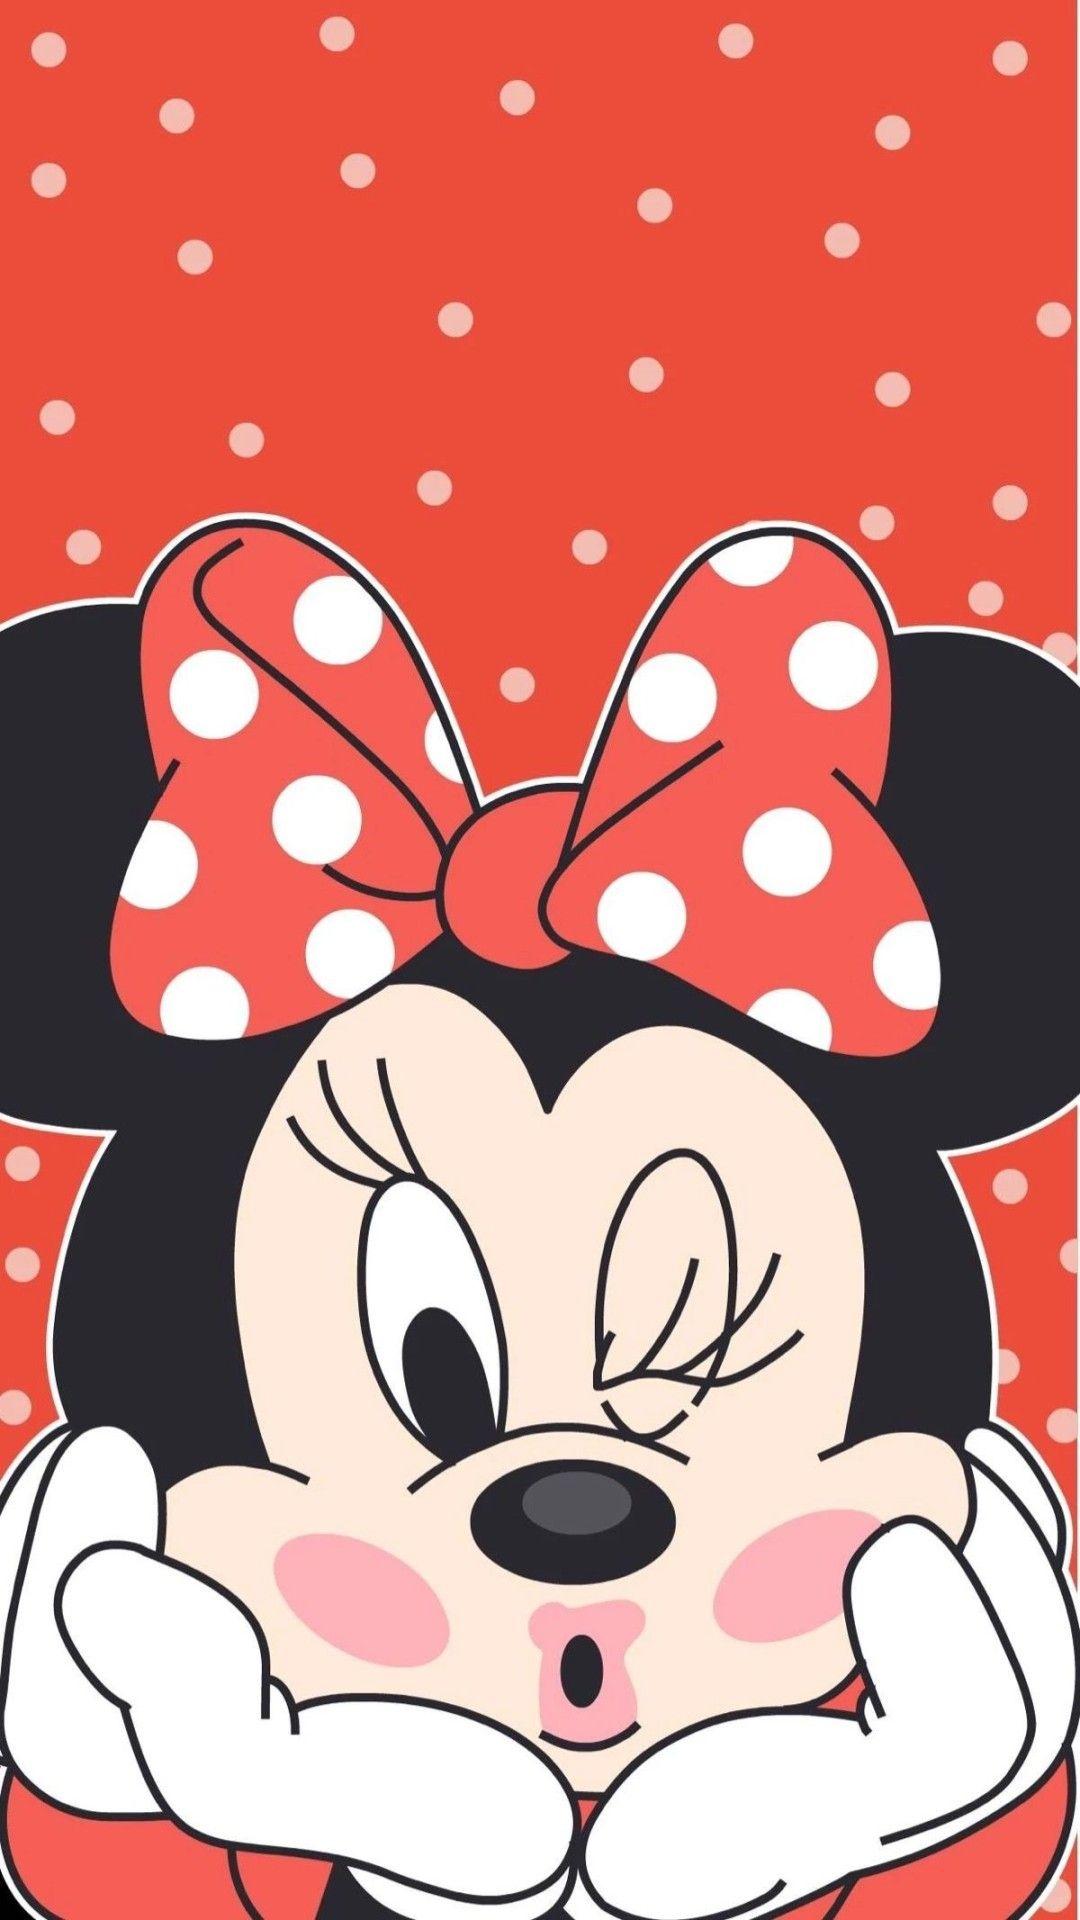 Minnie Mouse Wallpaper by Thekingblader995 on DeviantArt